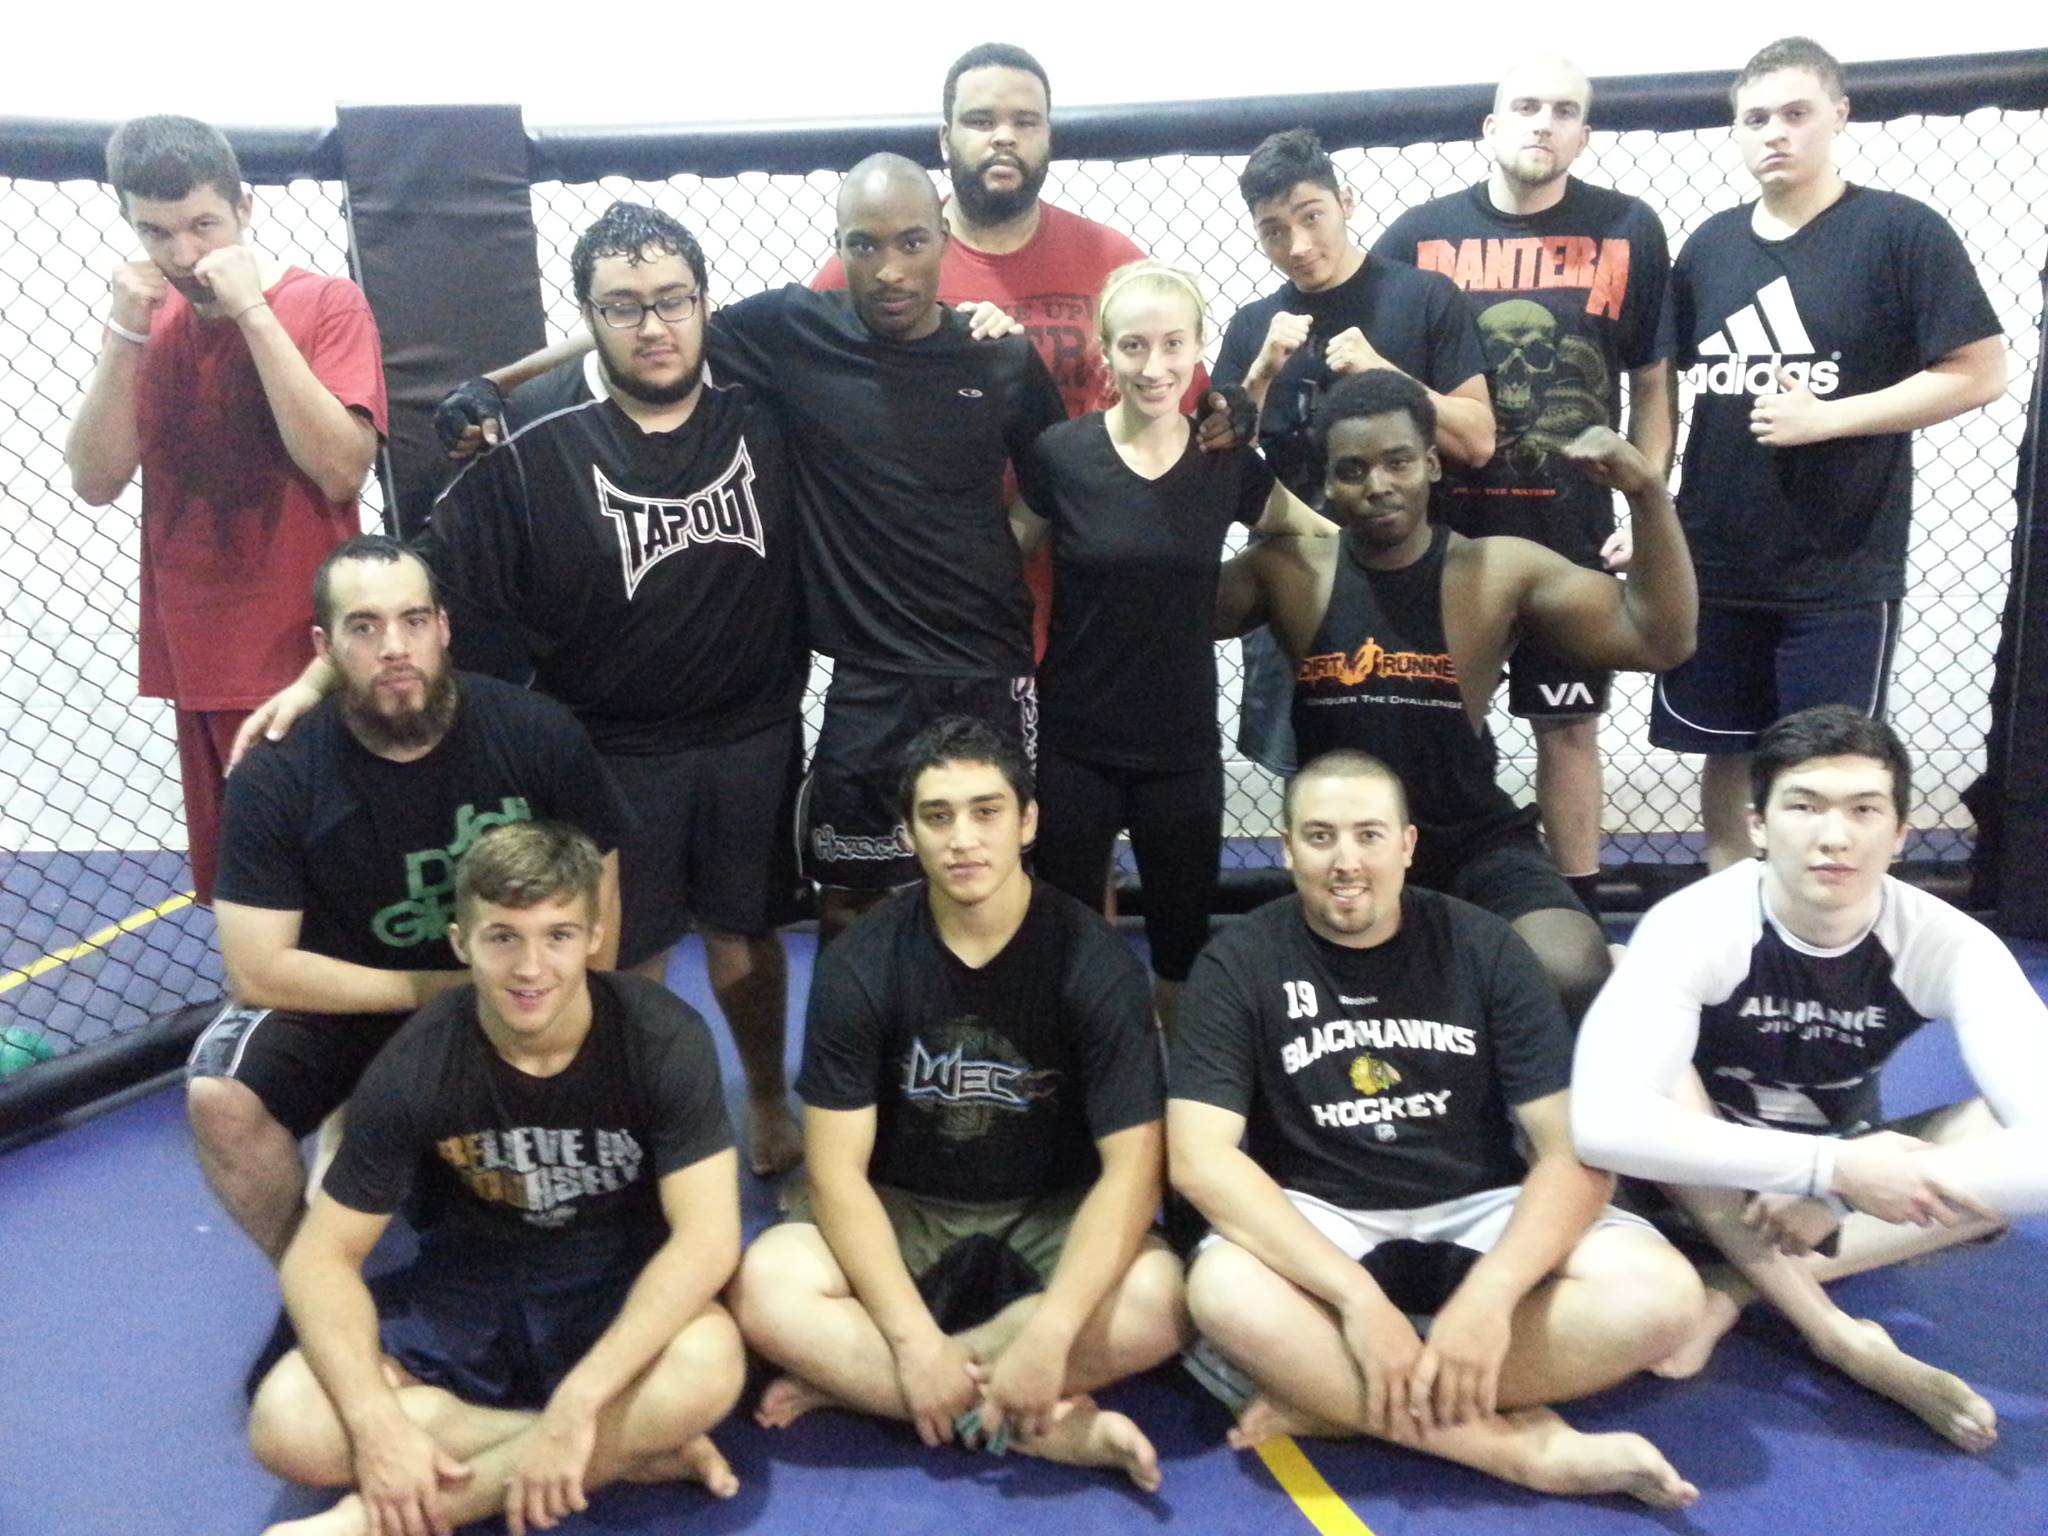 Chicago's Best MMA gyms-14 Days of Free Training Classes